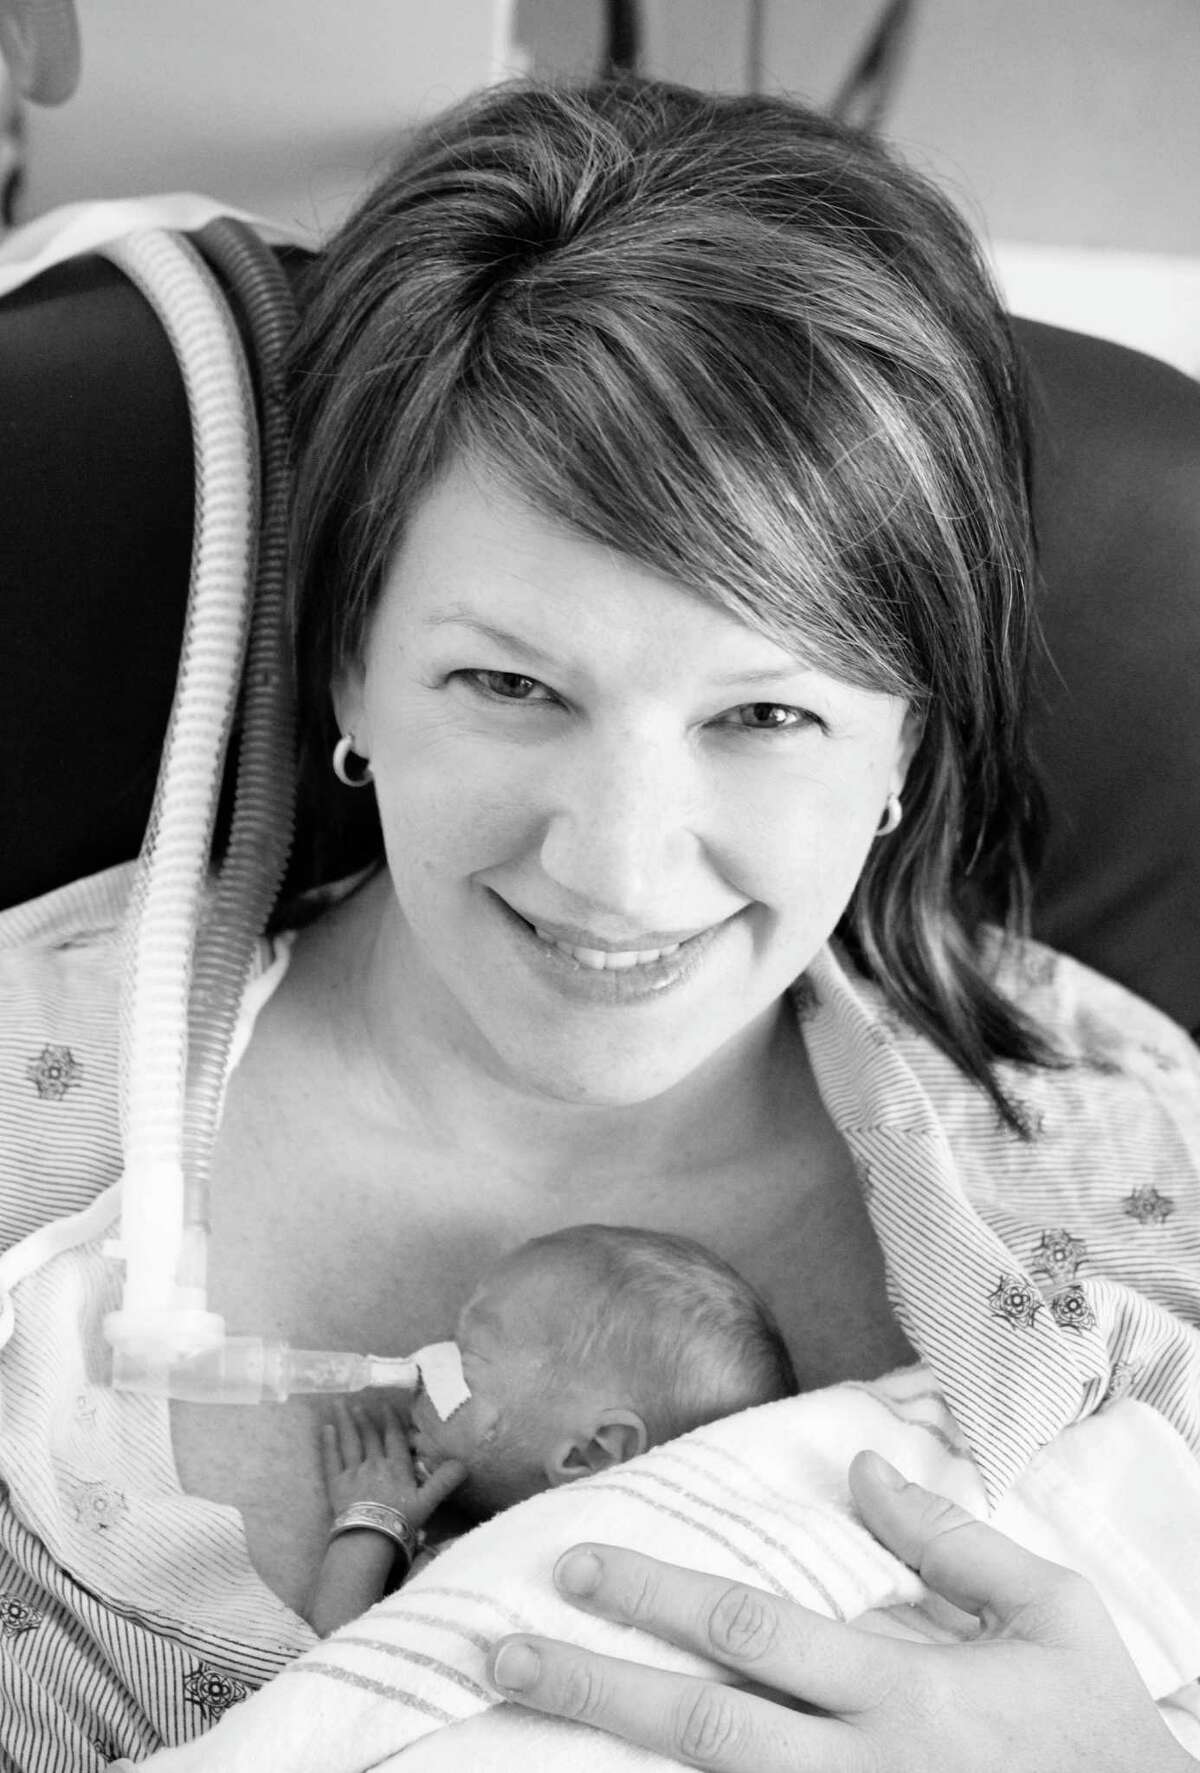 Michelle Nolan holds Denver Nolan, who was born prematurely in December 2011. The 2-pound, 3-ounce baby was so tiny that his father's wedding ring fit on his wrist like a bracelet.